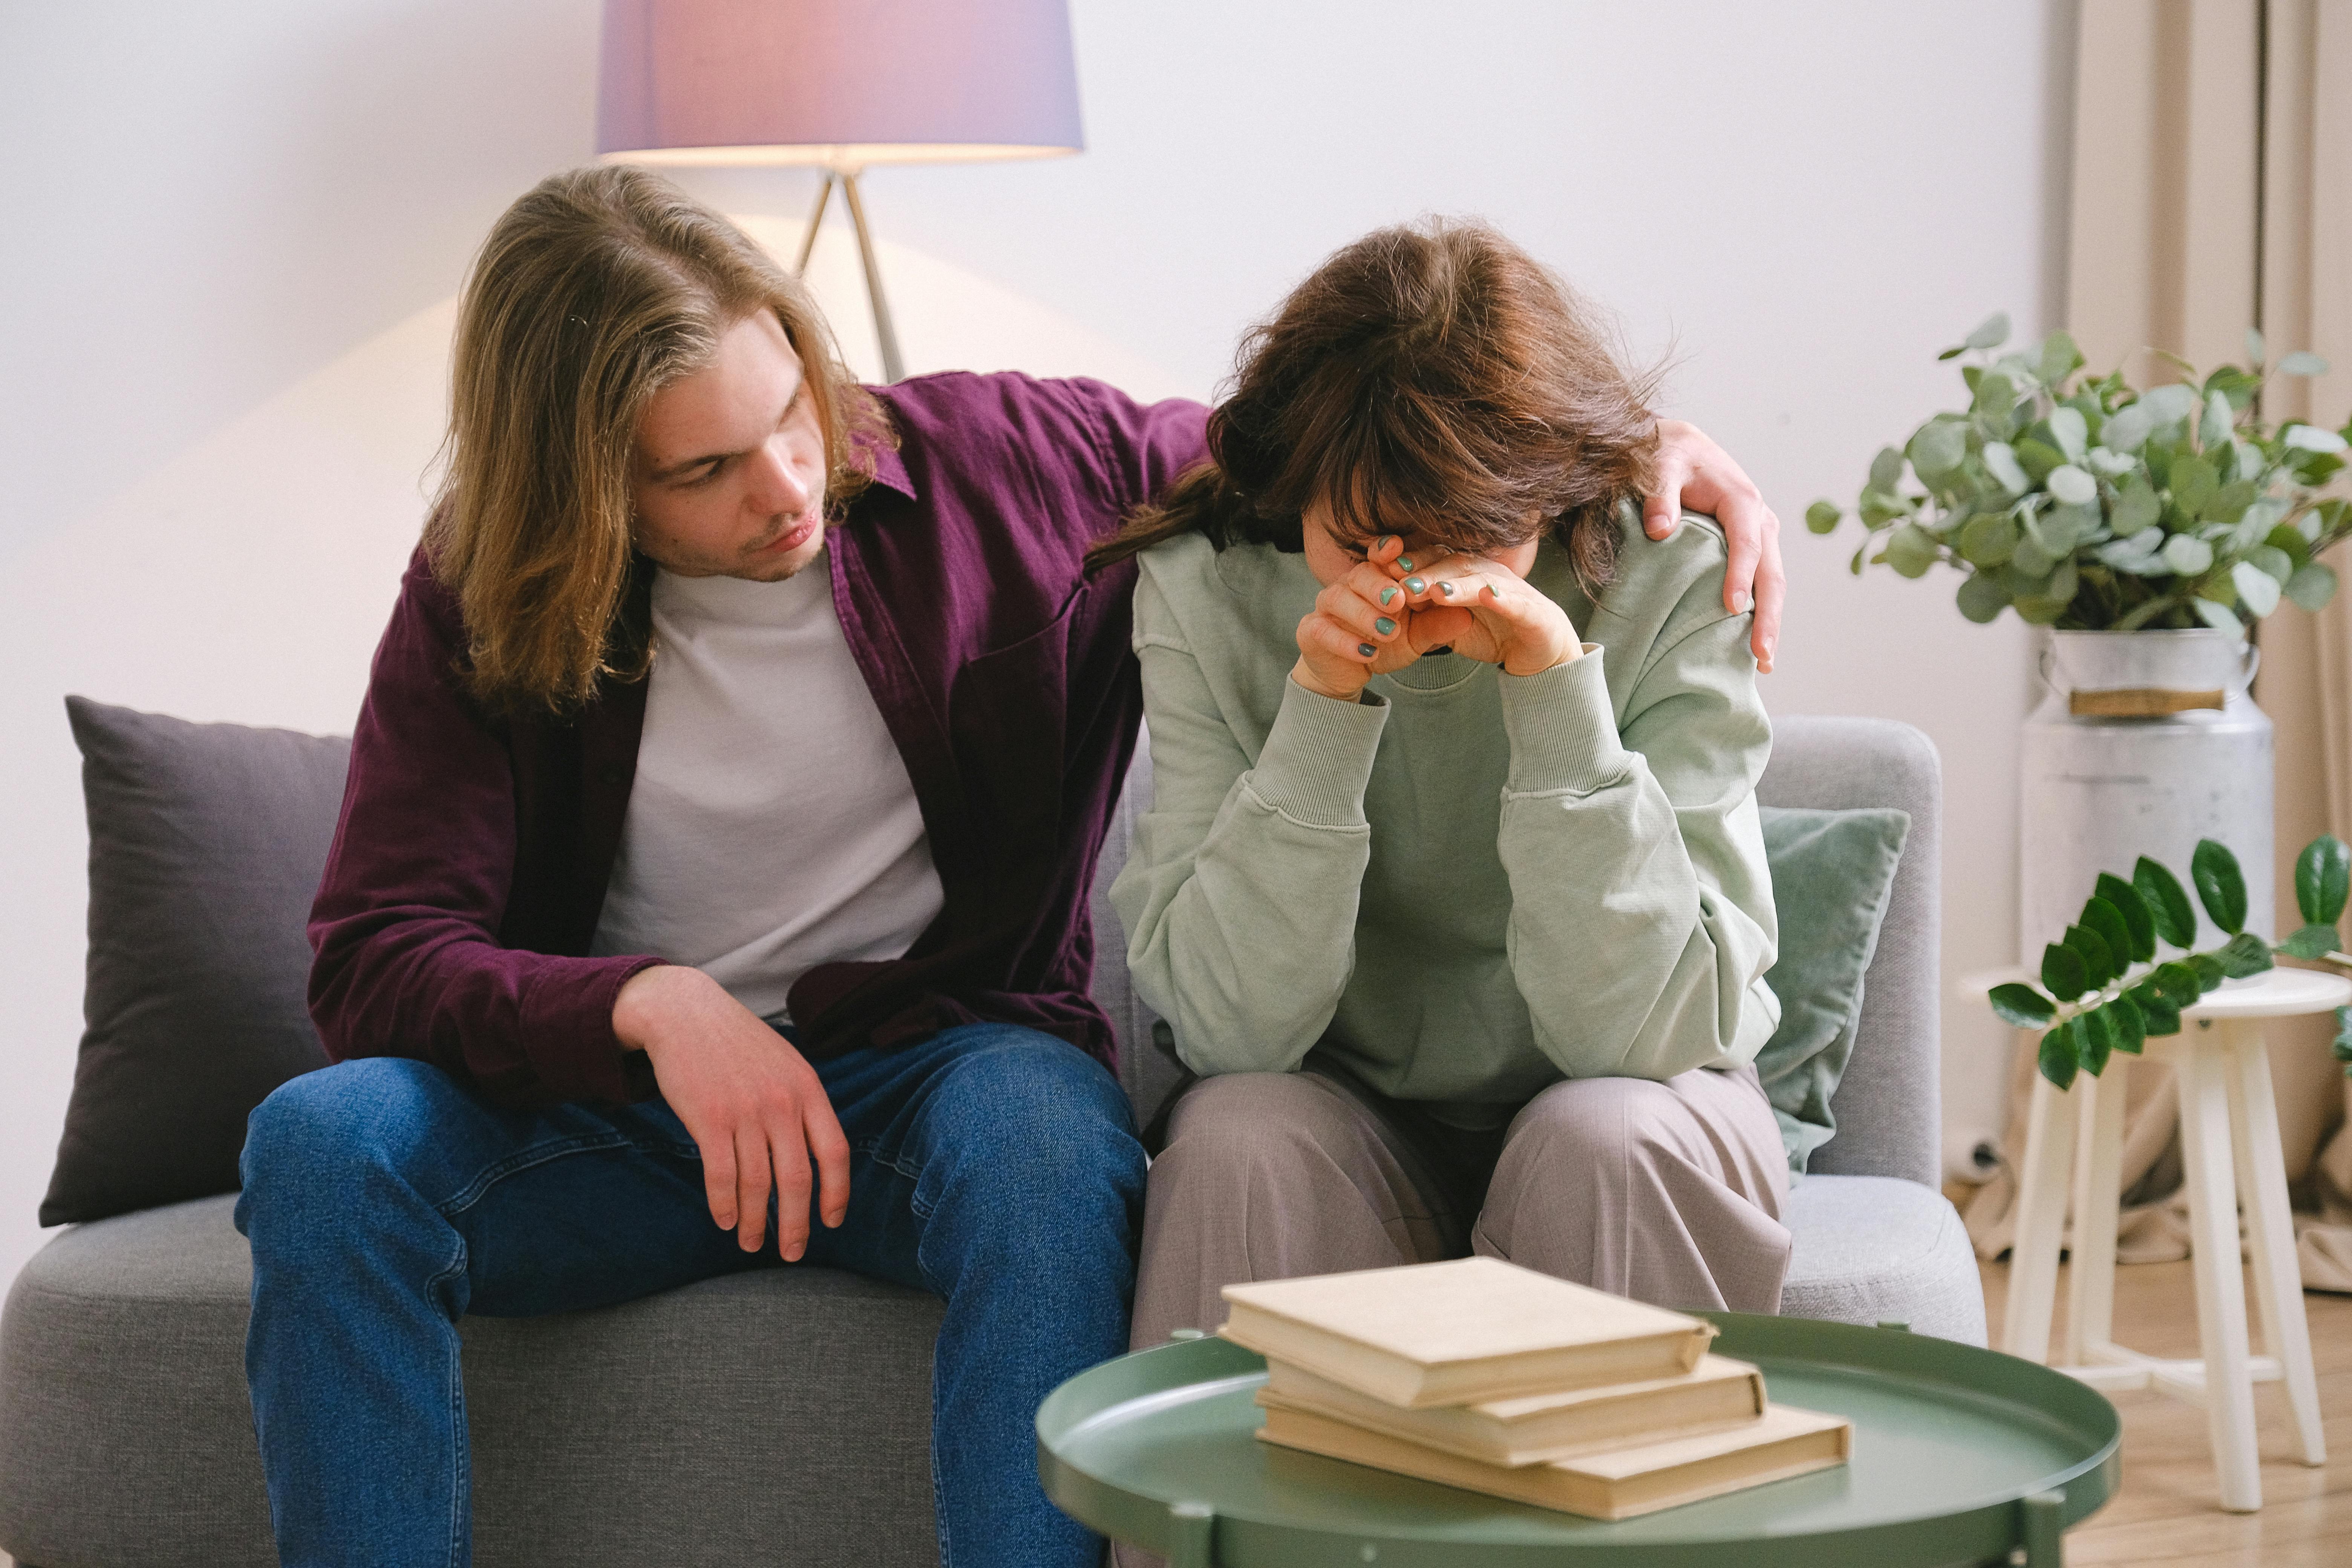 A frustrated young couple | Source: Pexels